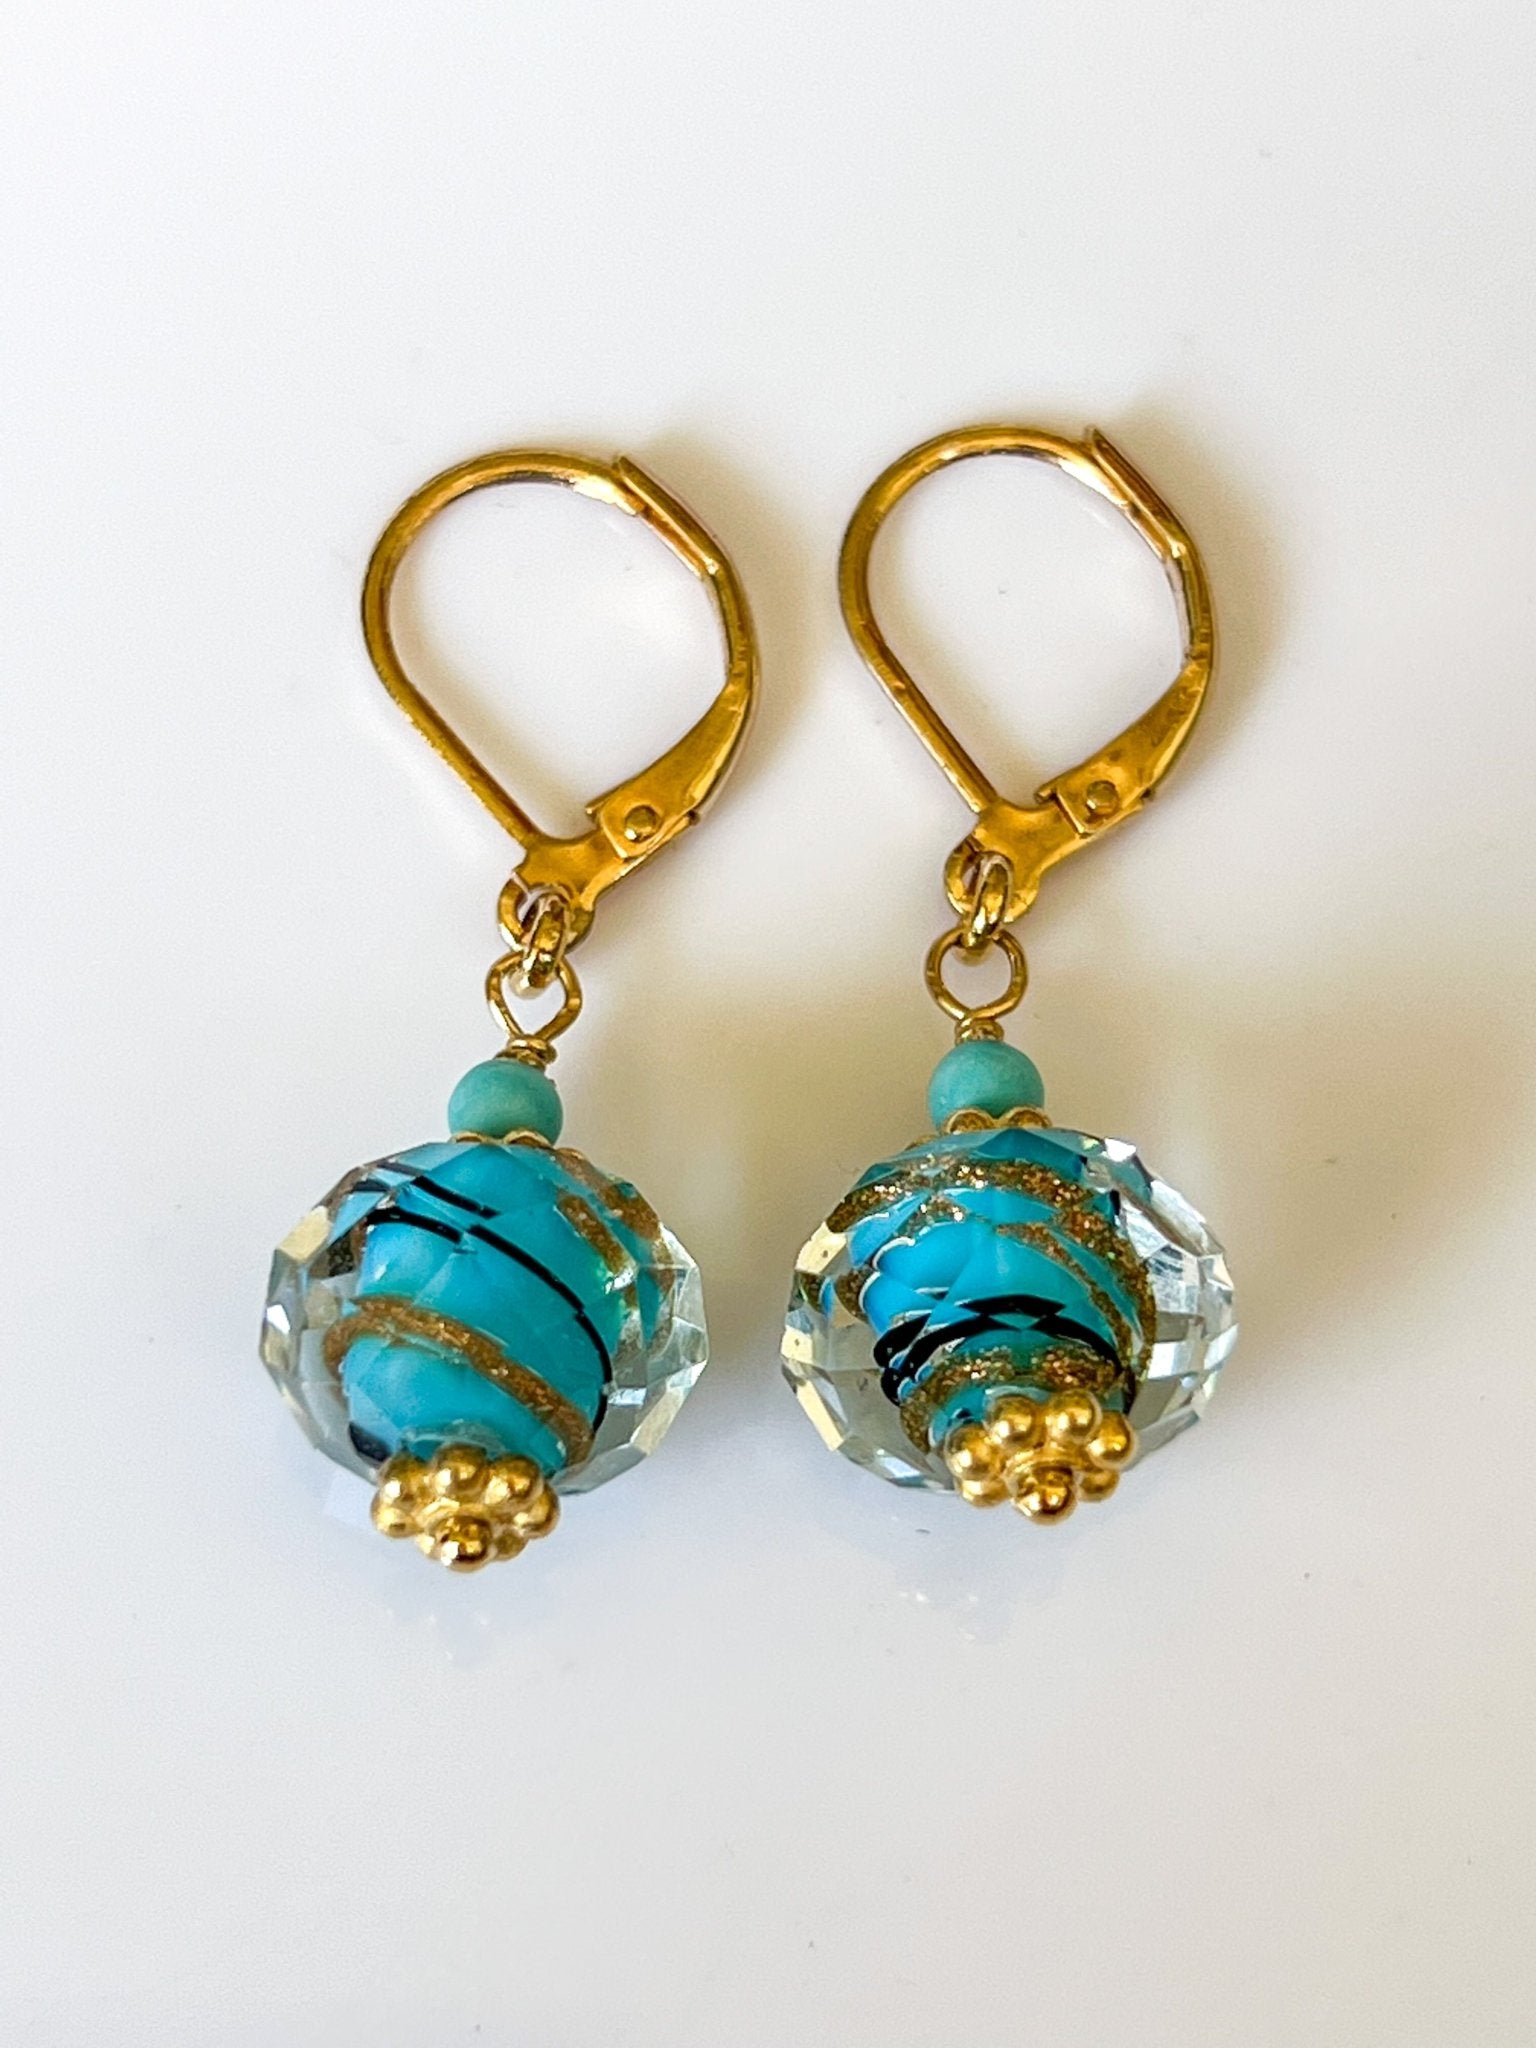 Turquoise and Lapis Swirl Peking Glass Gold Charm Earrings with Blue Turquoise by Sage Machado - The Sage Lifestyle